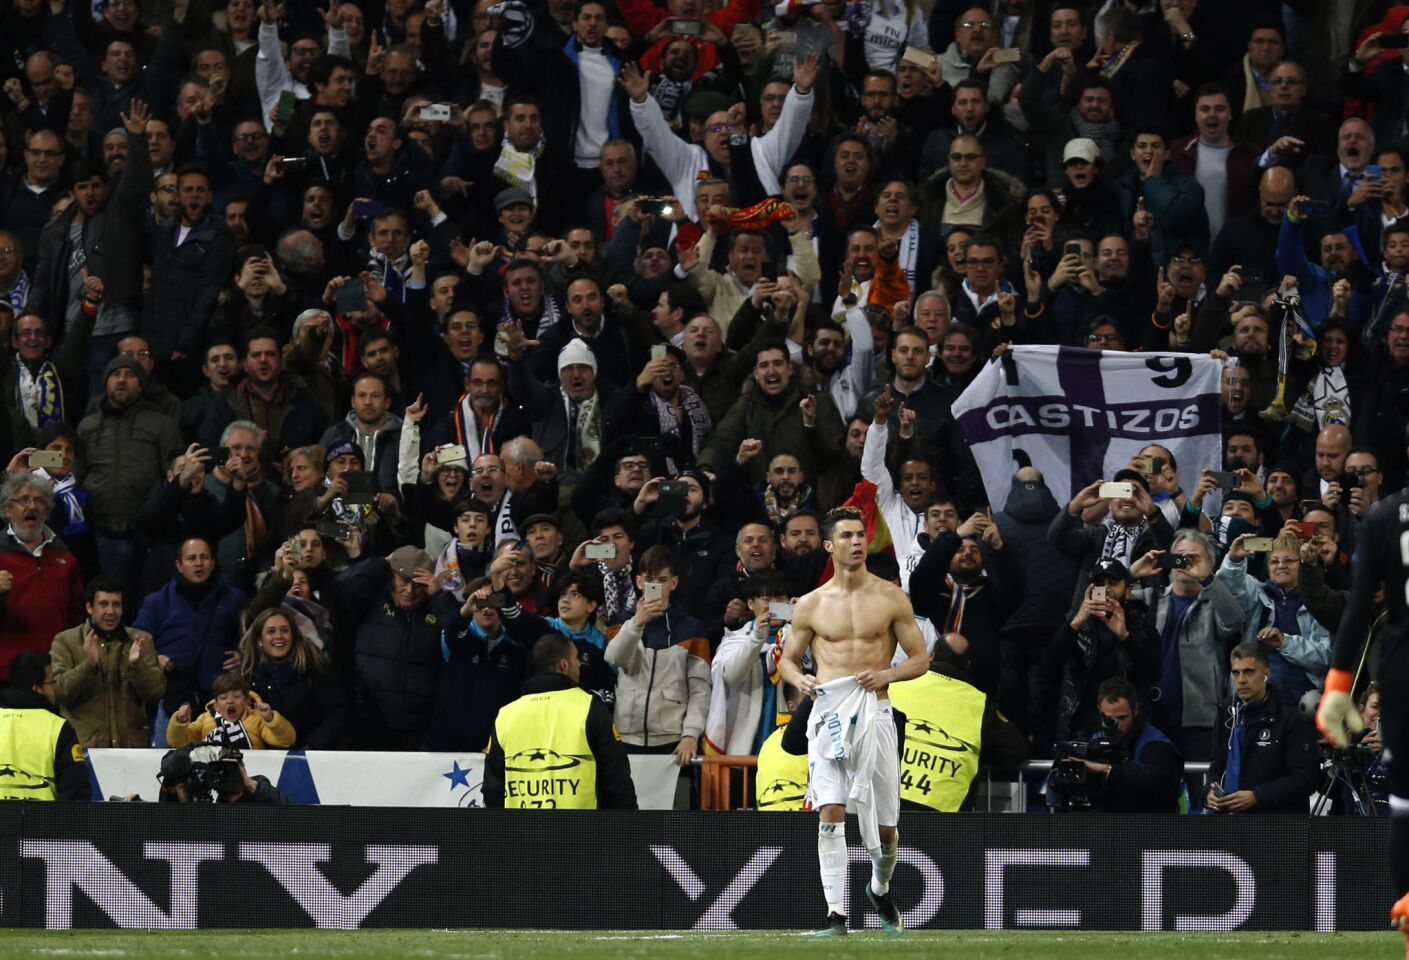 Real Madrid's Cristiano Ronaldo celebrates at the end of a Champions League quarter final second leg soccer match between Real Madrid and Juventus at the Santiago Bernabeu stadium in Madrid, Wednesday, April 11, 2018. (AP Photo/Francisco Seco)